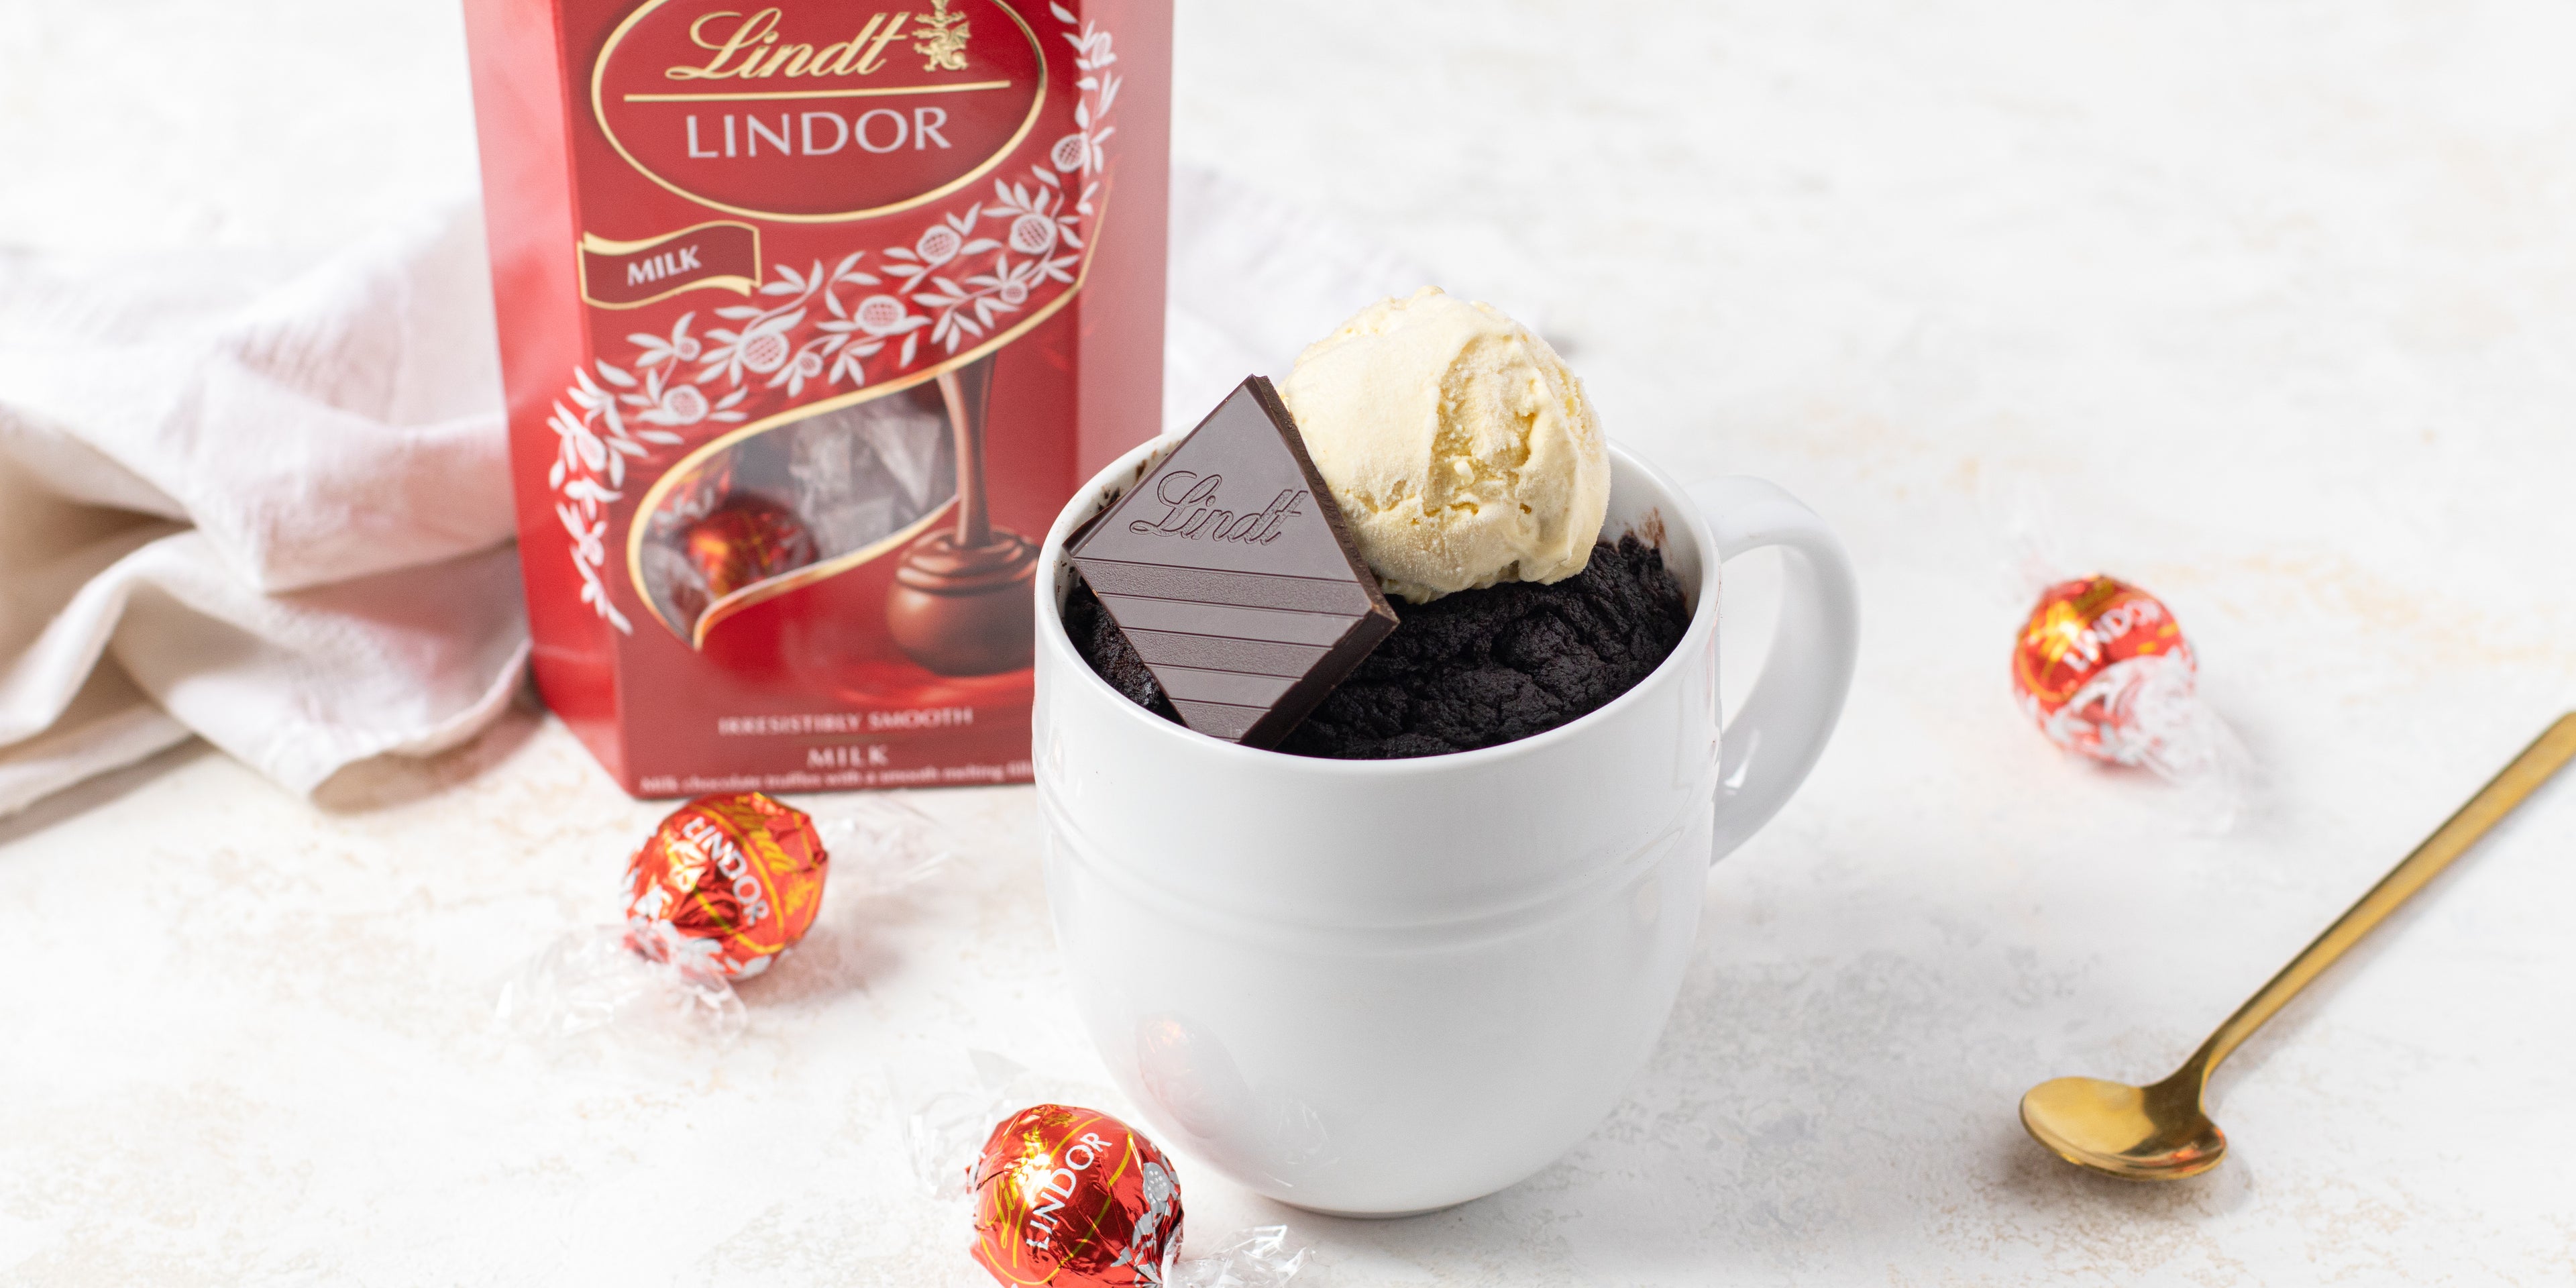 Chocolate Mug Cake customised with Lindt chocolate and a dollop of vanilla ice cream. In the background these is a box of Lindt balls